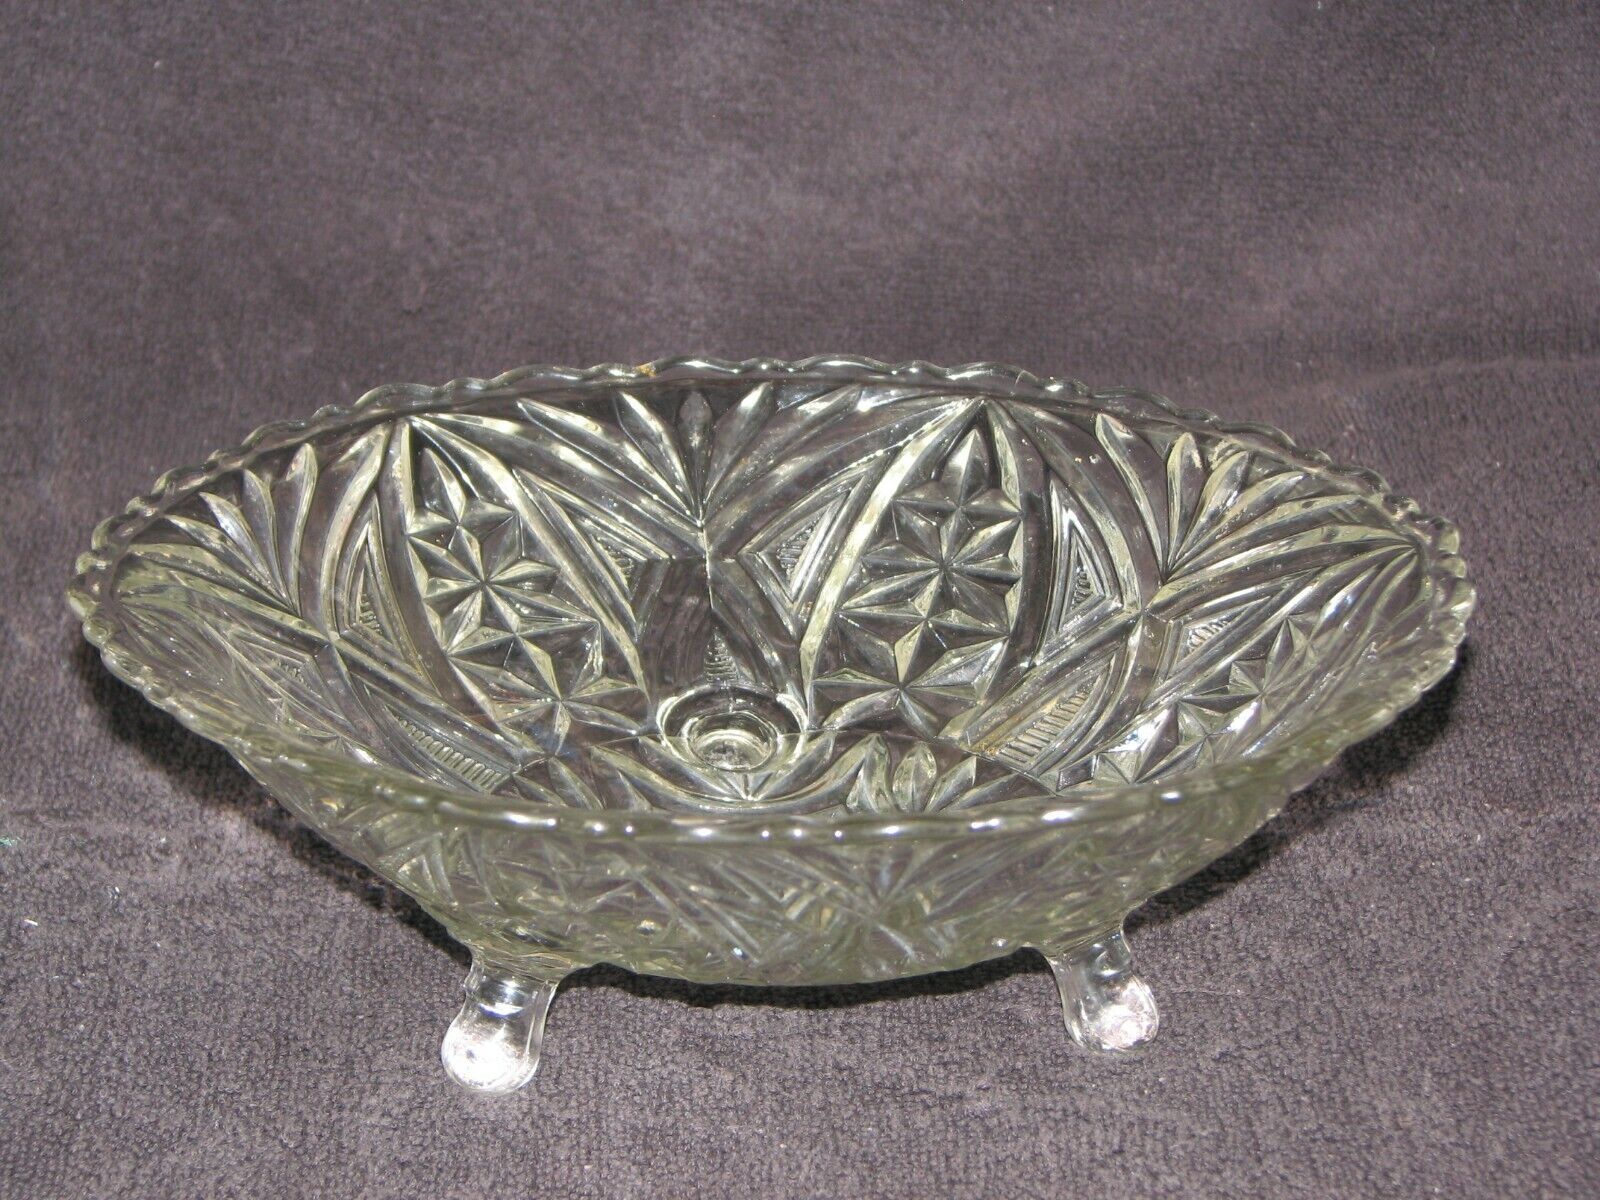 Primary image for Anchor Hocking Medalion clear glass candy dish, 3 footed